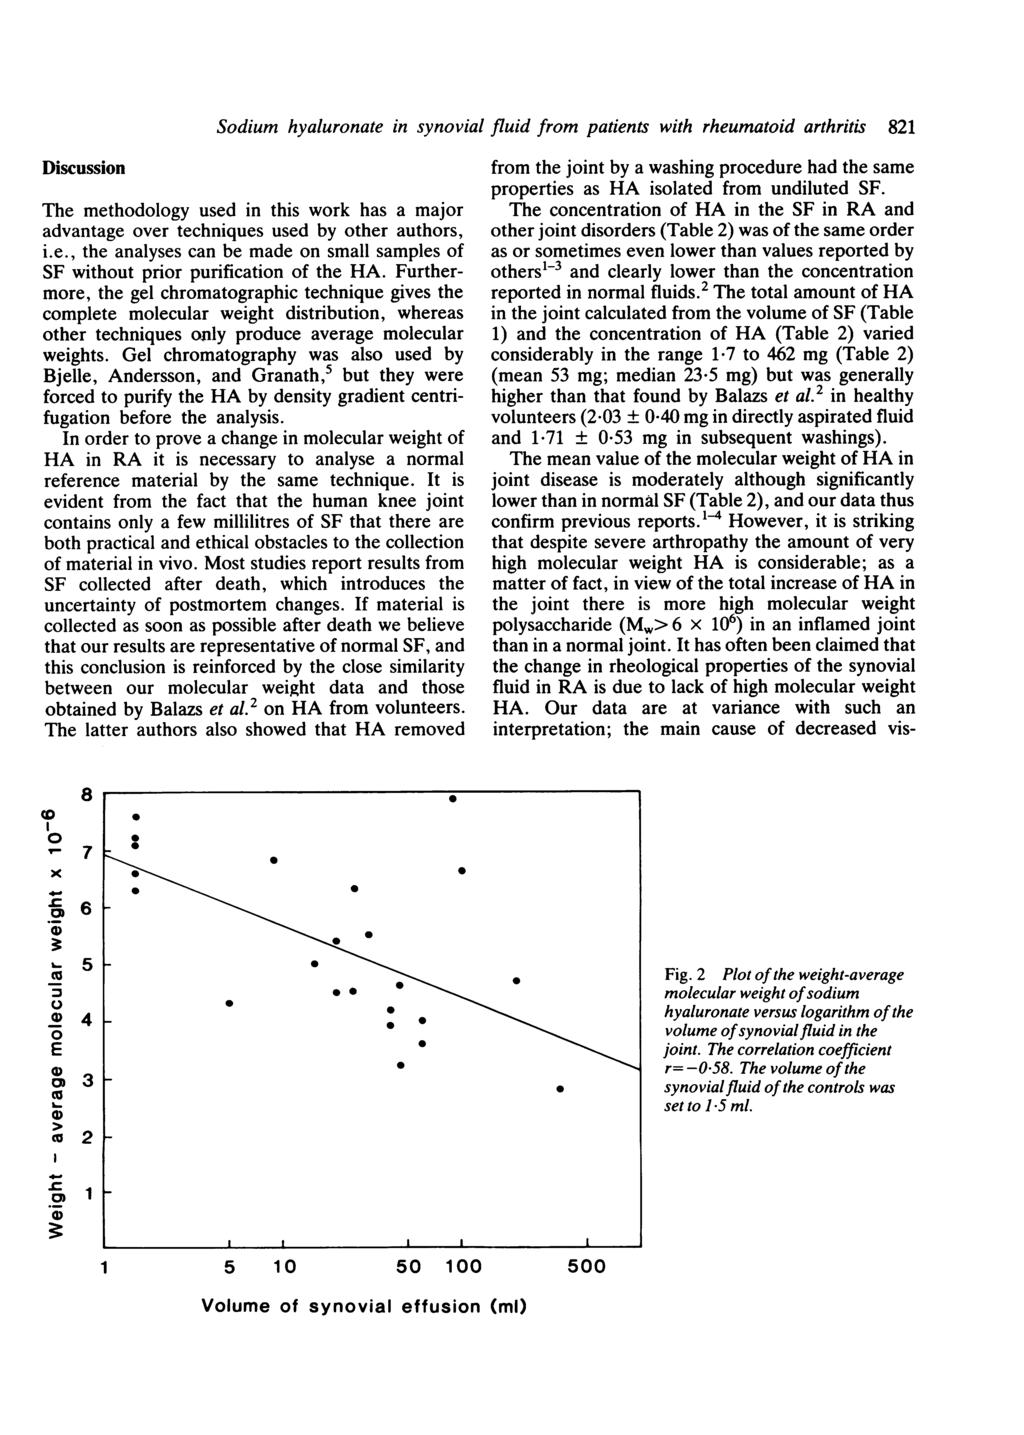 Discussion Sodium hyaluronate in synovial fluid from patients with rheumatoid arthritis 8 The methodology used in this work has a major advantage over techniques used by other authors, i.e., the analyses can be made on small samples of S without prior purification of the HA.